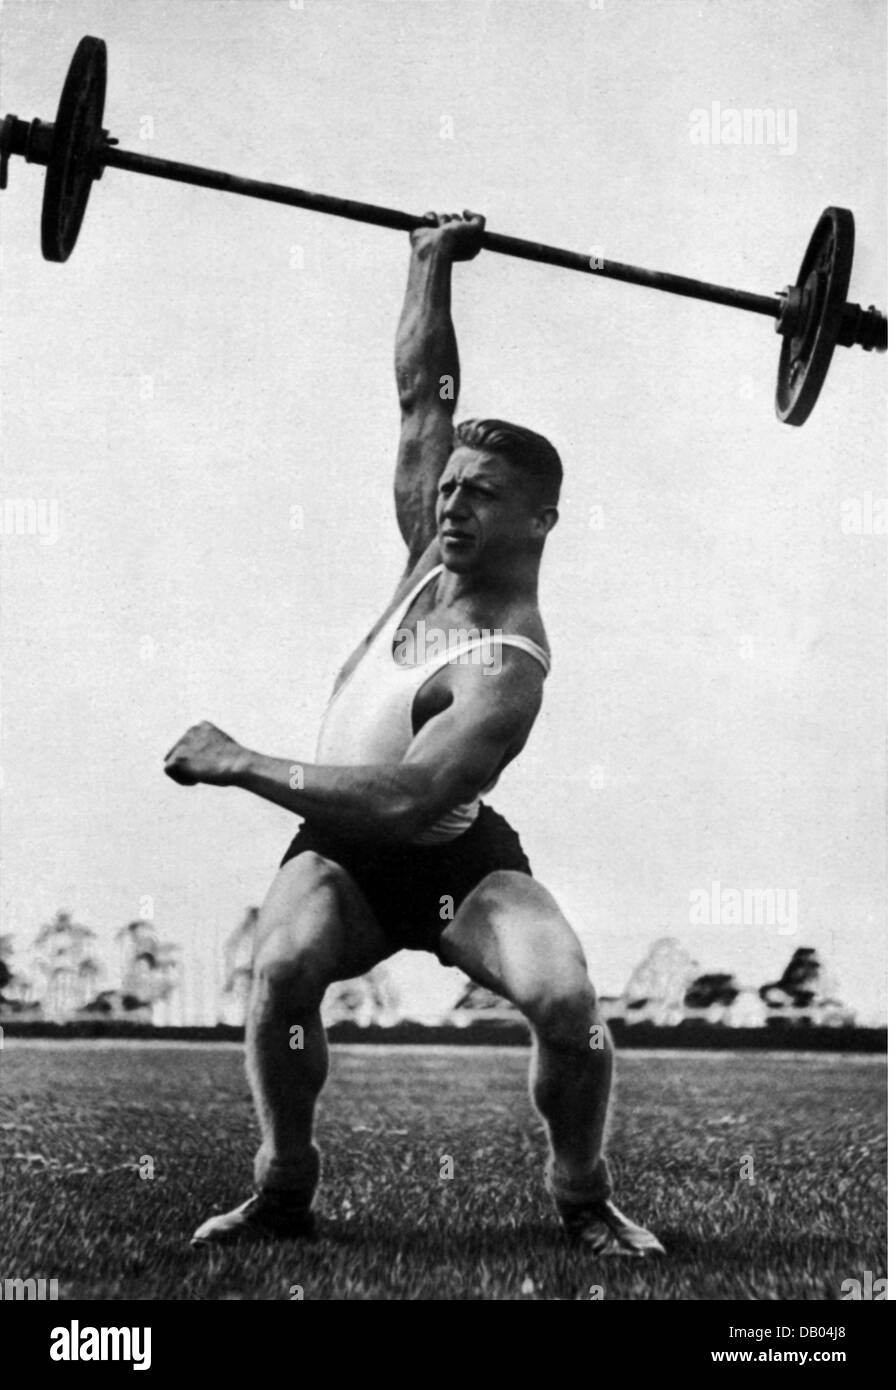 sports, weight lifting, jerk, German weightlifter Obschruf (Trier), 1935, Additional-Rights-Clearences-Not Available